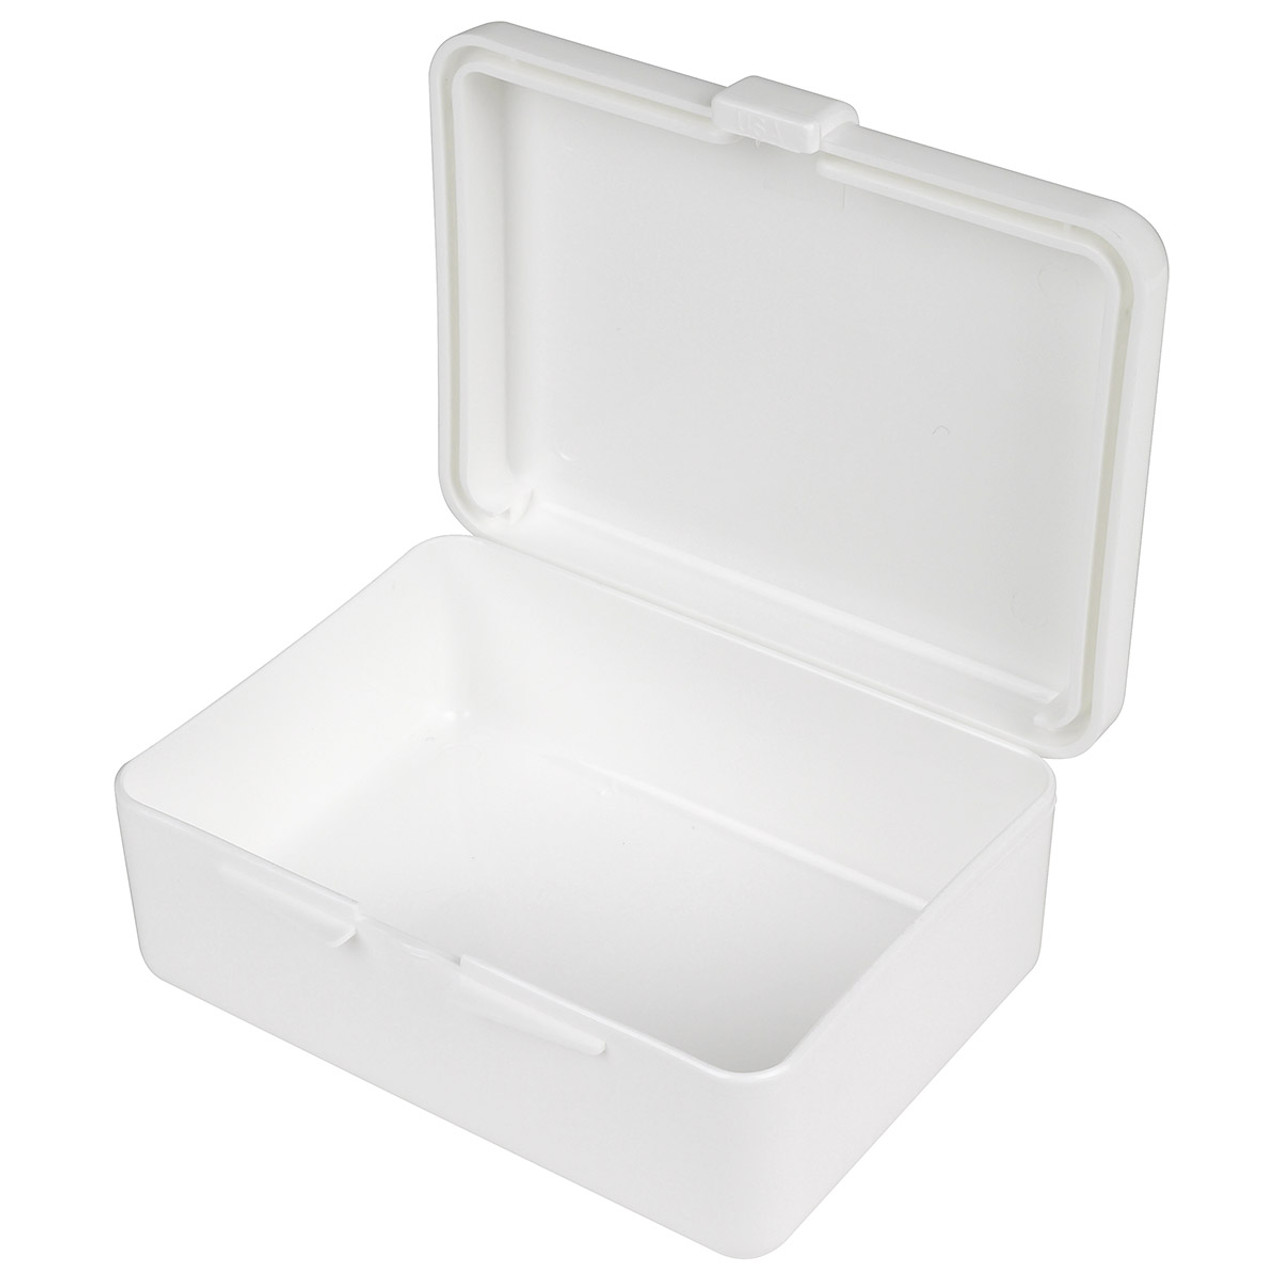 Plastic Case 3.5'' x 4.75'' x 1.75'' - EMT Bags, Backpacks and First Aid  Kit Containers